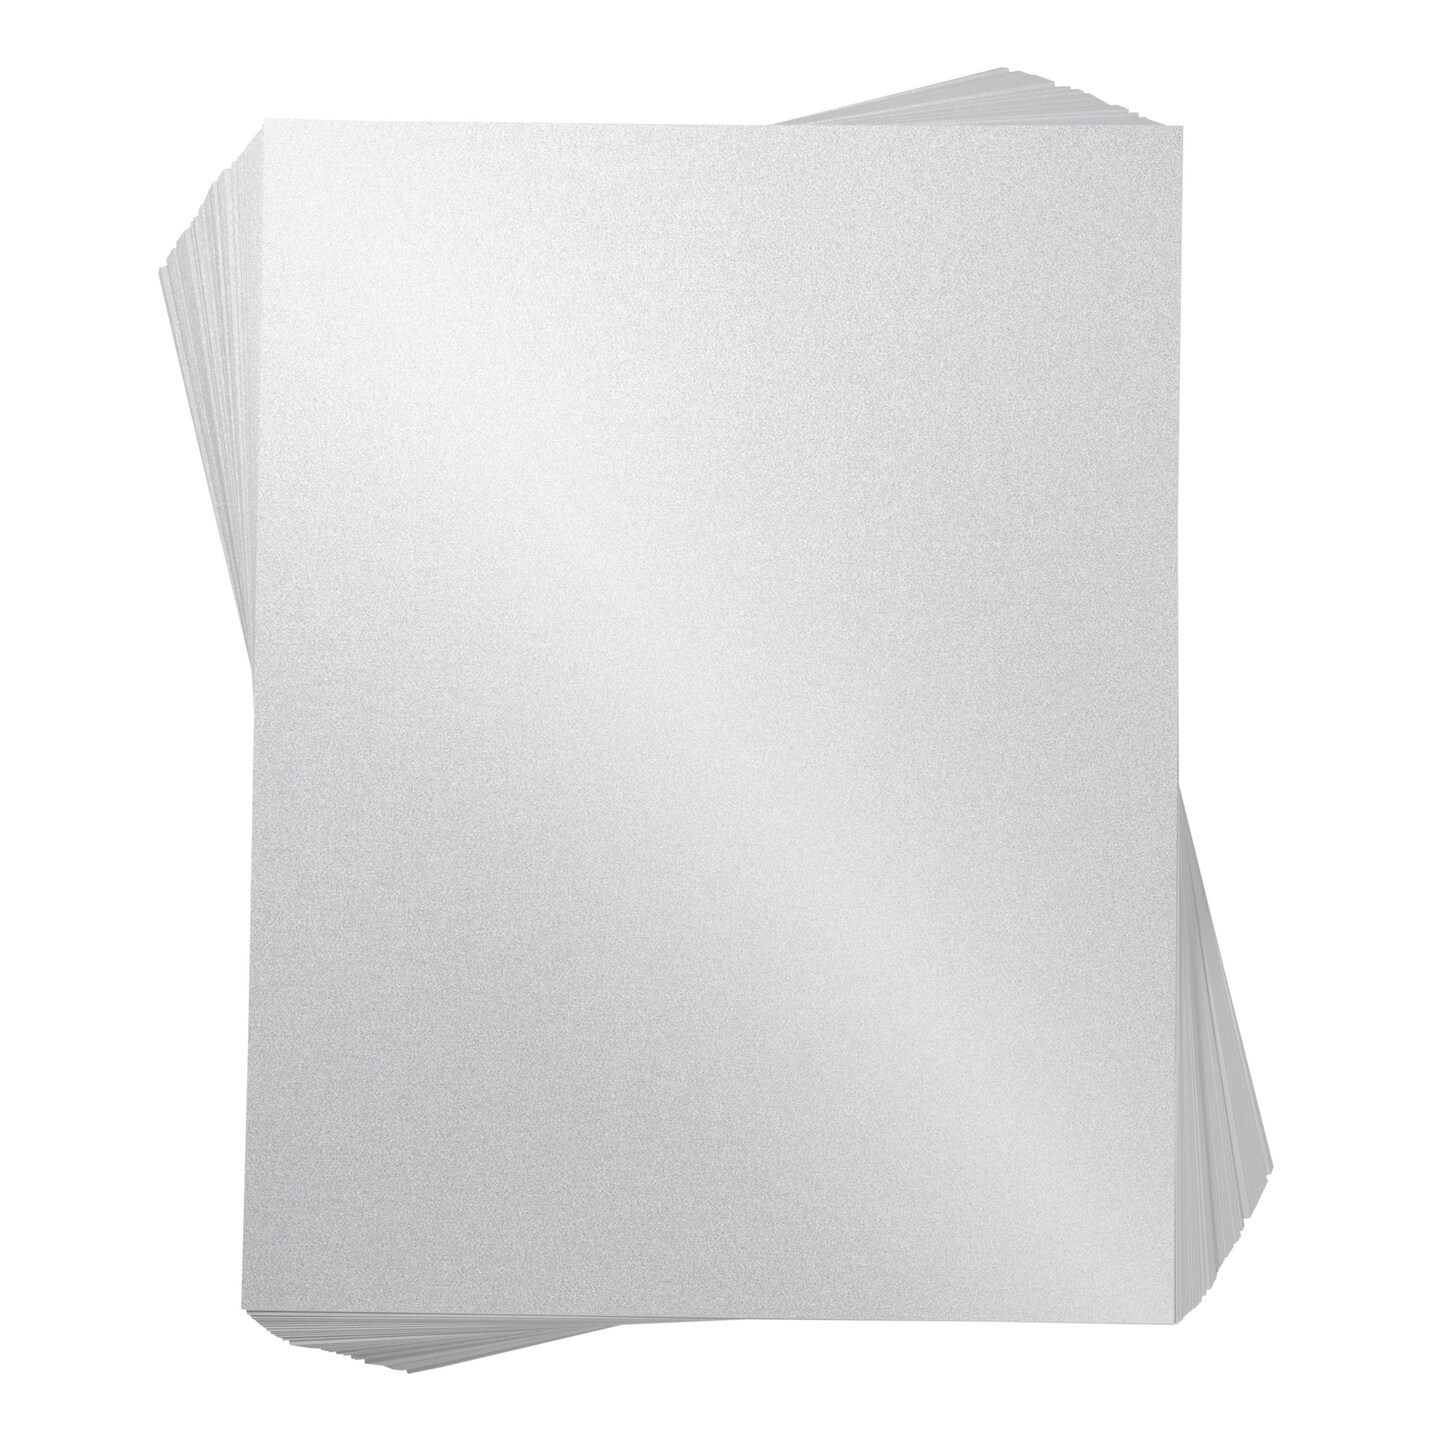 96 Sheets Pearl White Shimmer Cardstock, Metallic Paper for